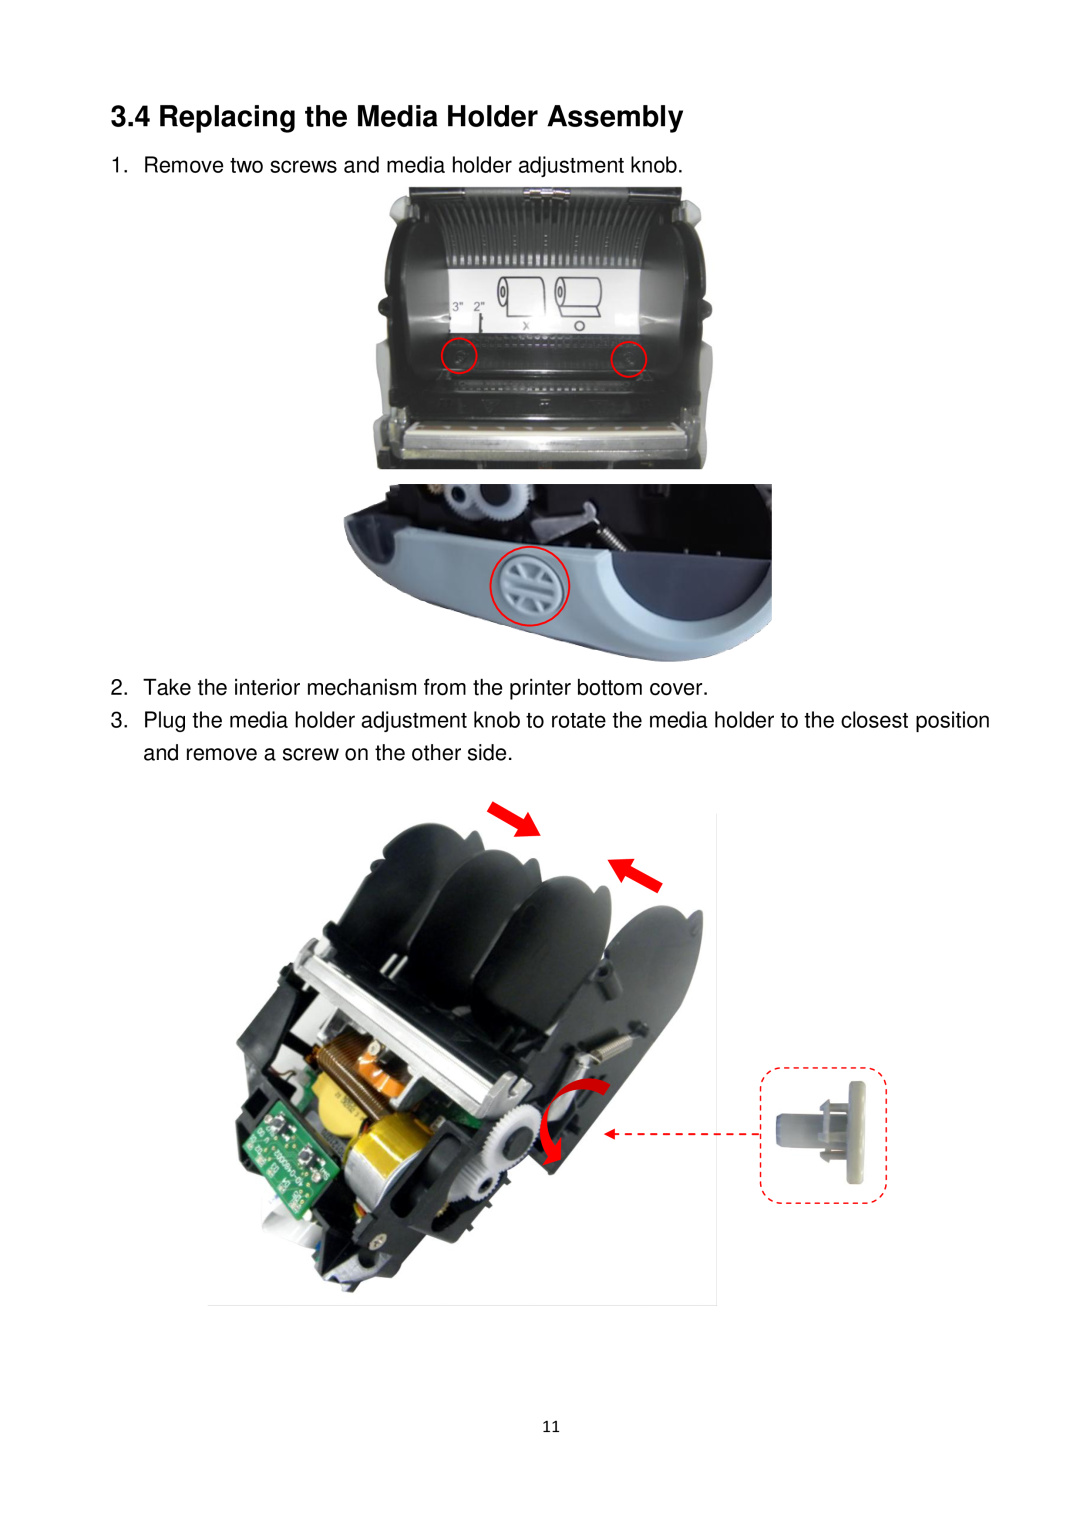 Alpha Vision Tech Alpha-3R service manual Replacing the Media Holder Assembly 